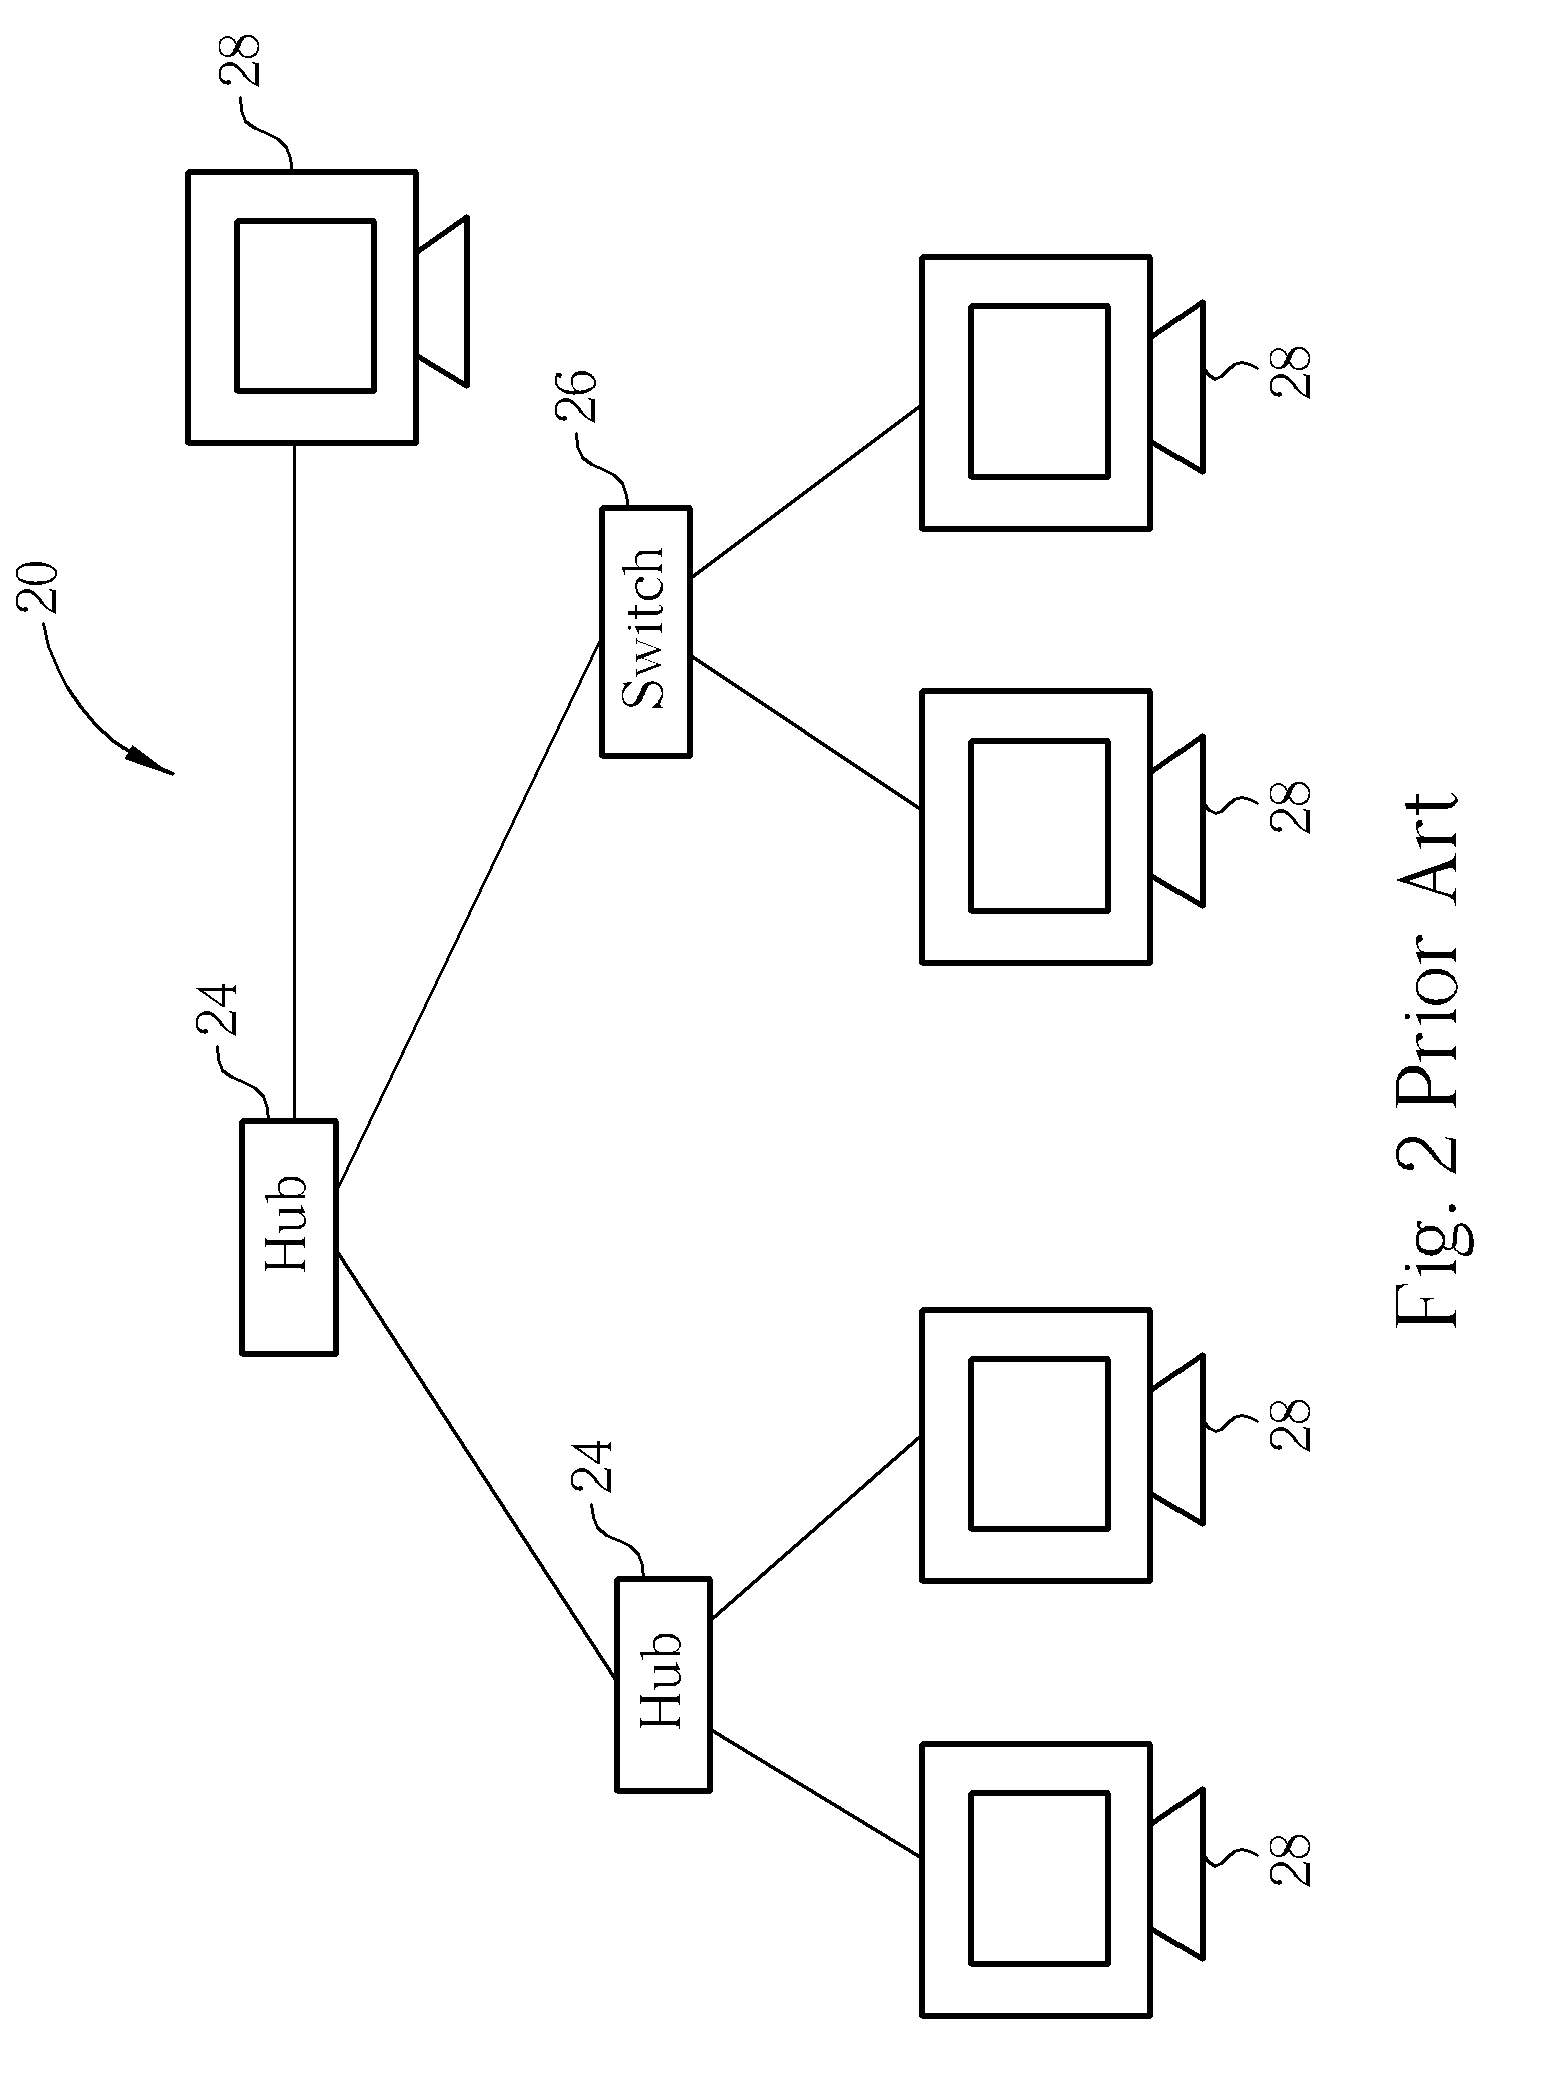 Switch capable of controlling data packet transmission and related method